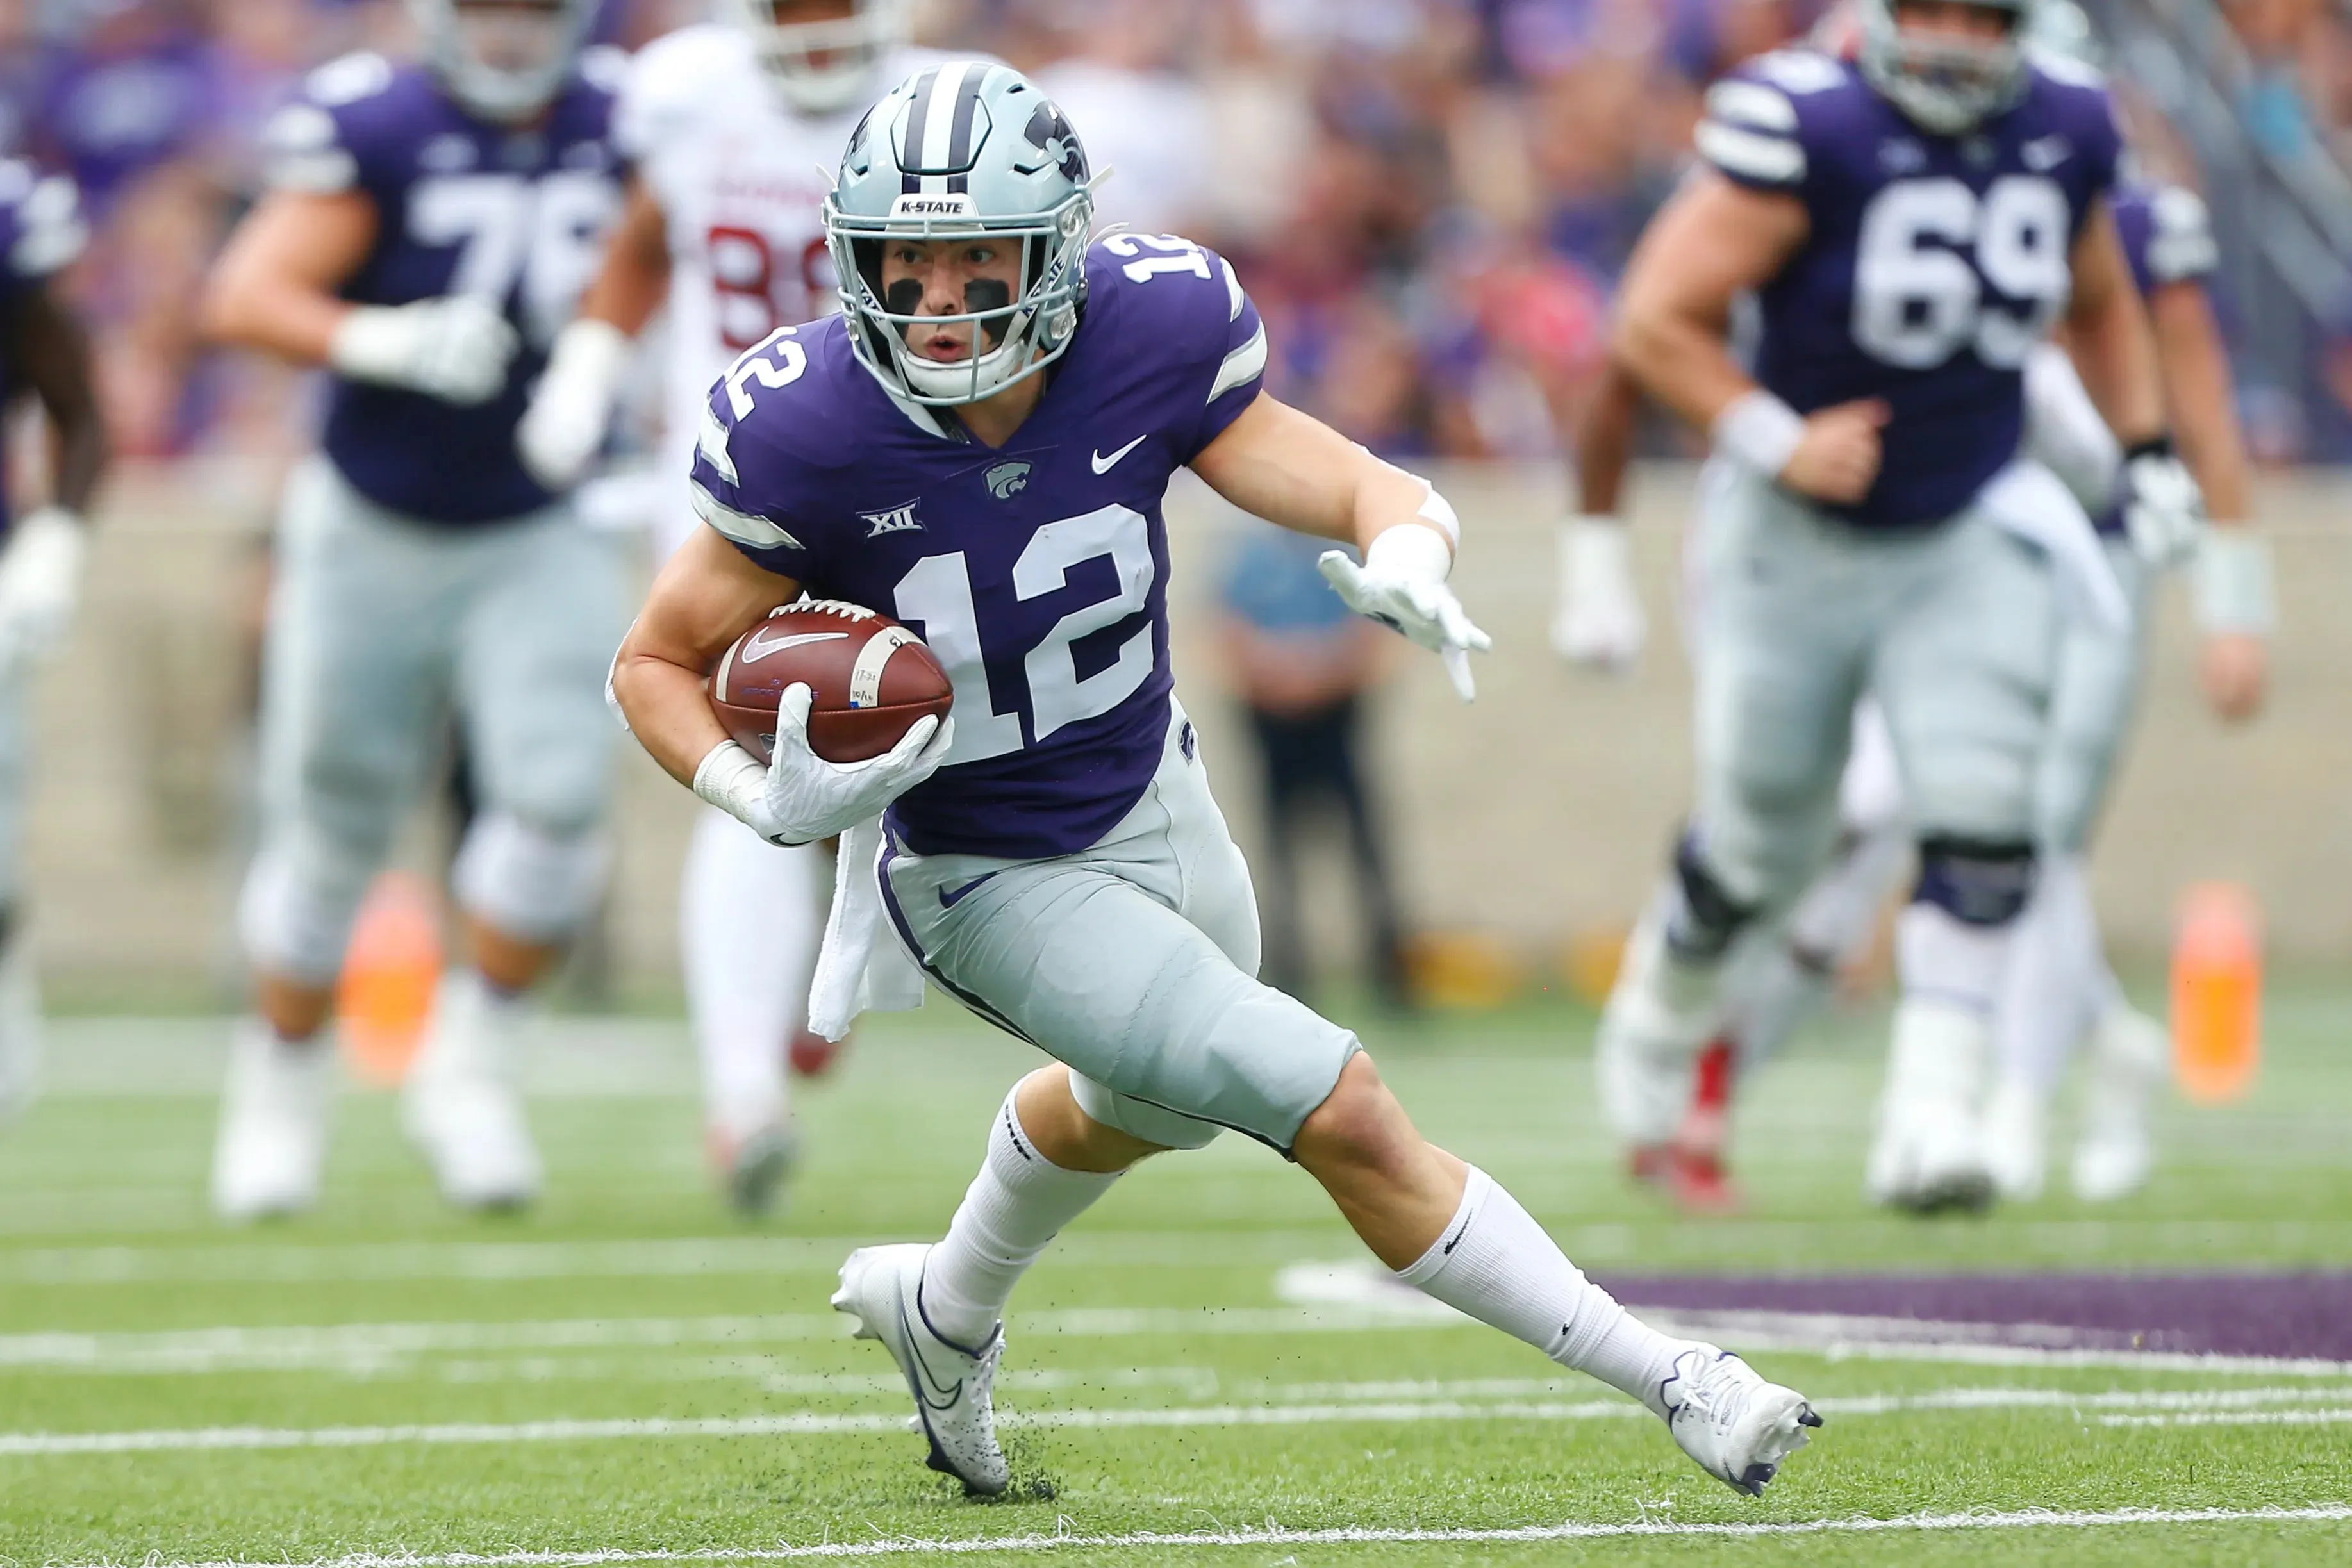 Landry Weber, a K-State player who is discerning and intends to enter seminary.?w=200&h=150